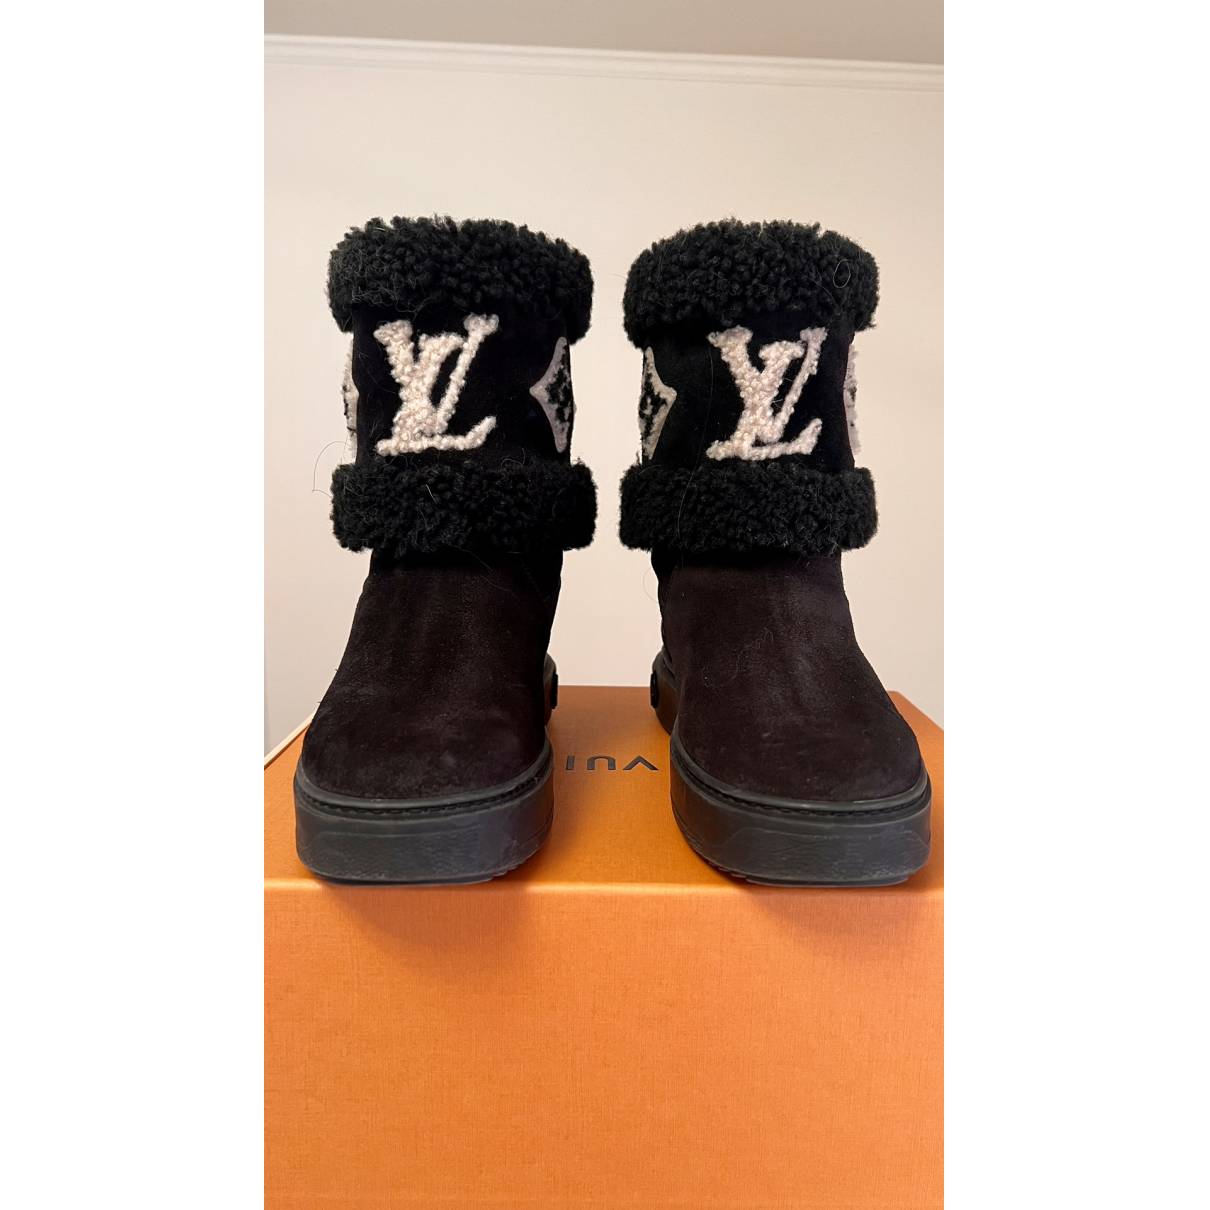 Buy Louis Vuitton LOUISVUITTON Size: 37 1/2 Snowdrop Line Monogram Boa  Ankle Boots from Japan - Buy authentic Plus exclusive items from Japan